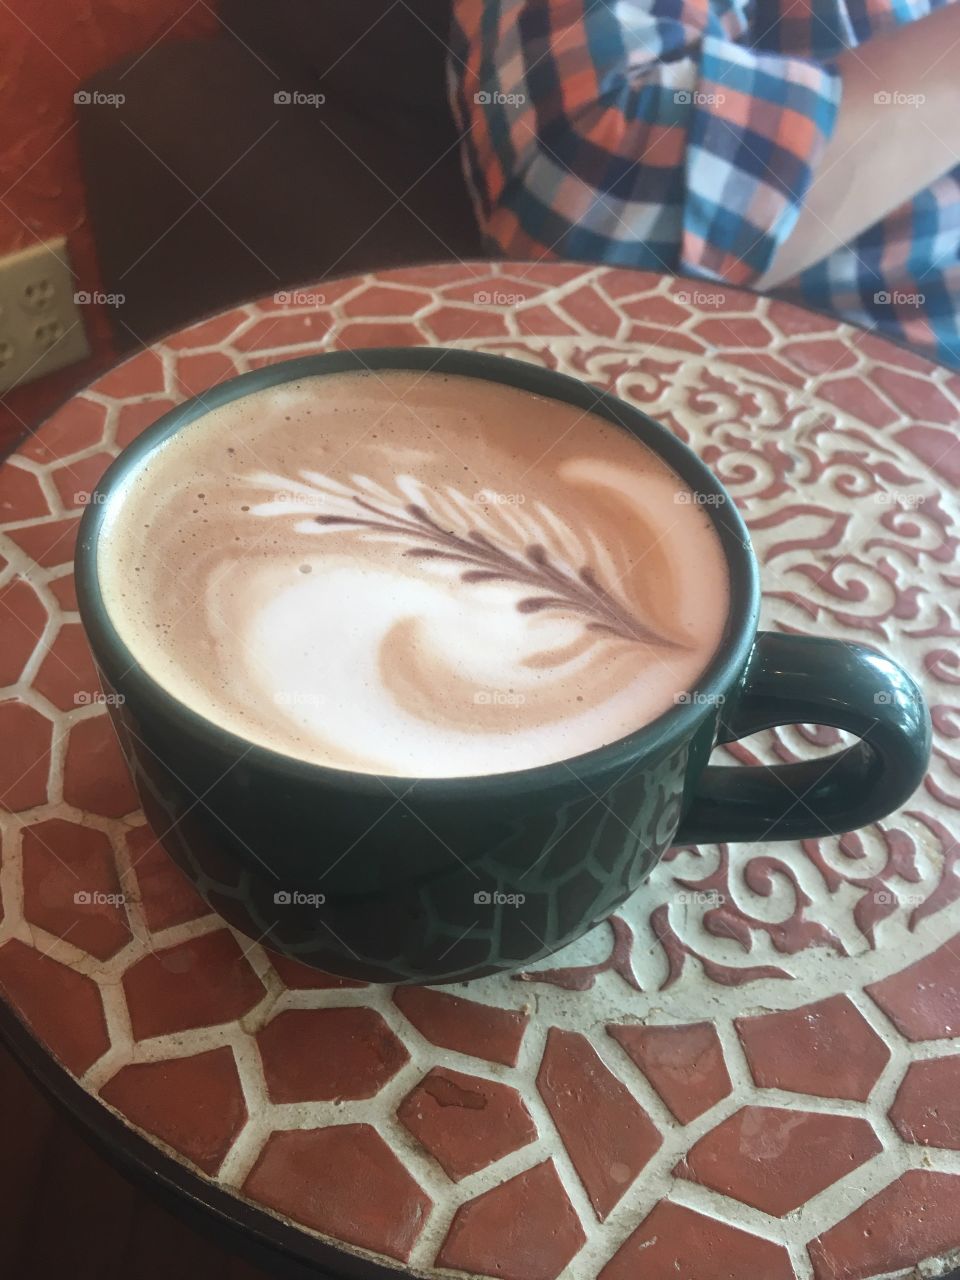 Beautiful handcrafted mocha latte from a small town coffee shop.